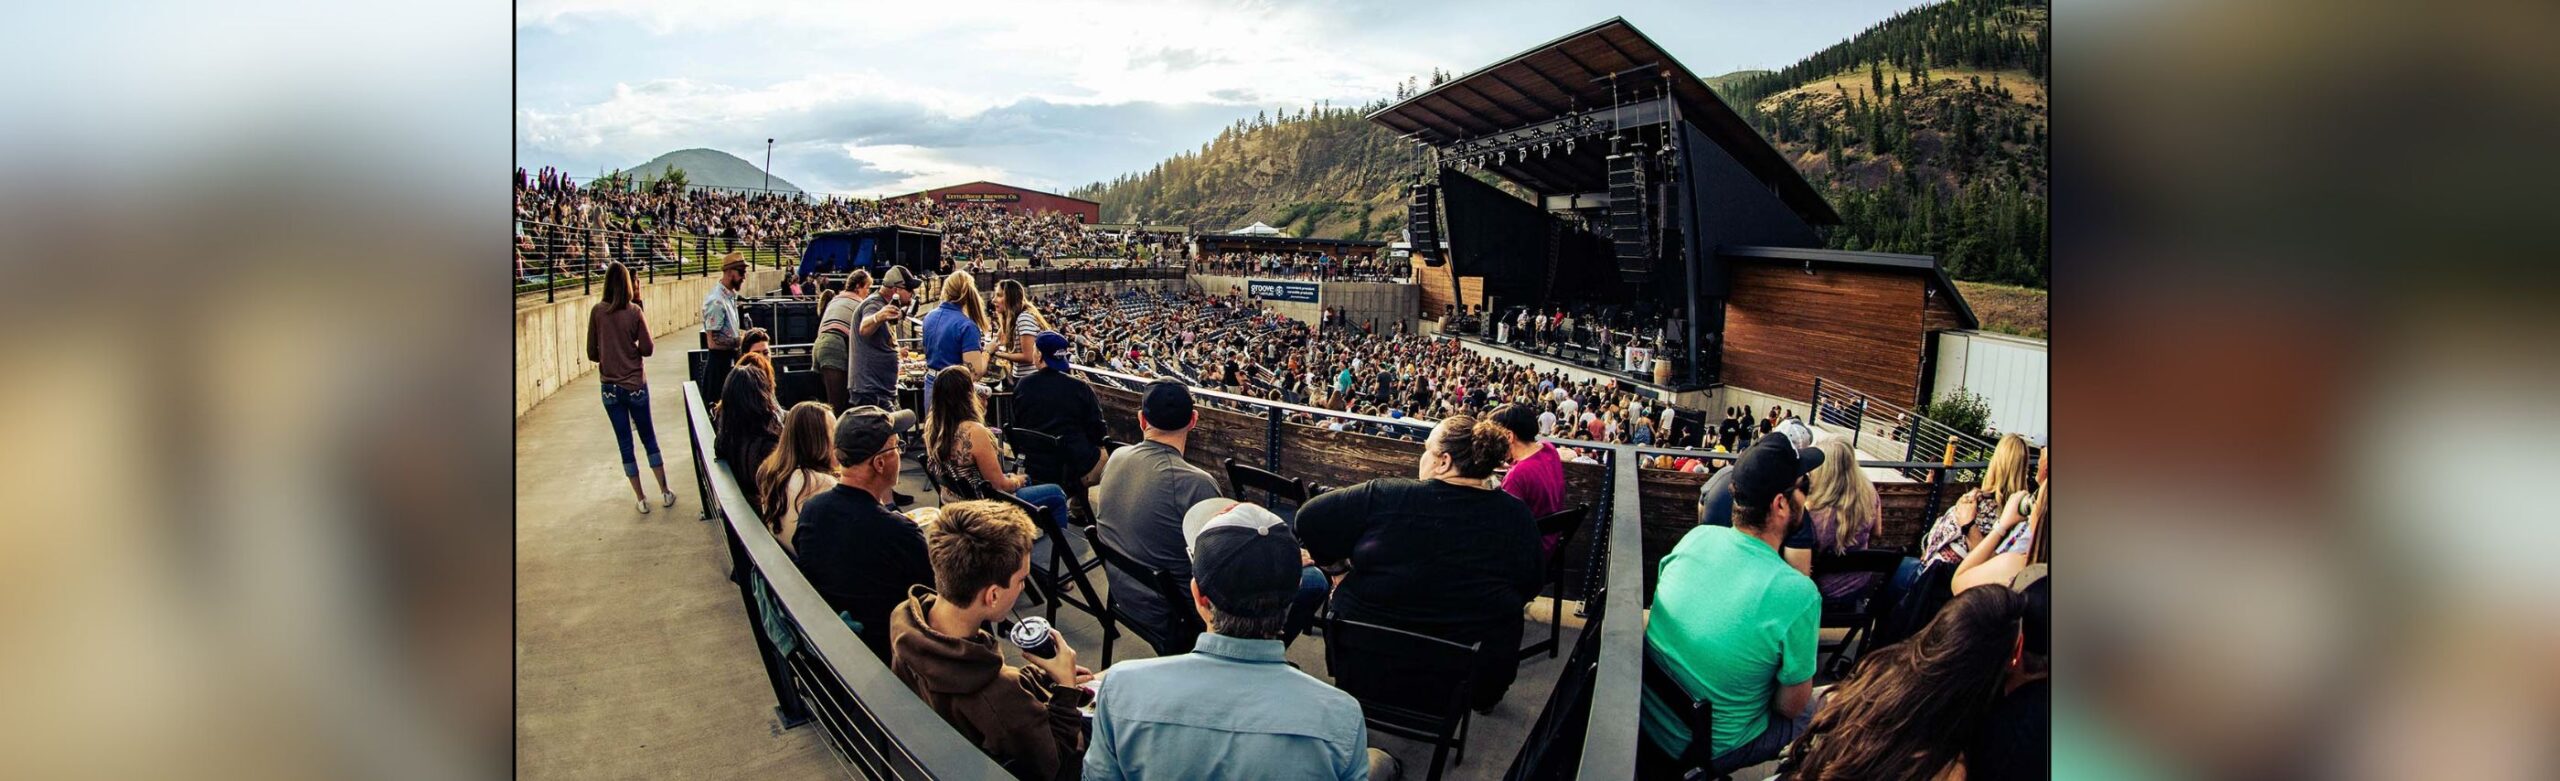 Now Available: Premium Box Seats for Gary Clark Jr. at KettleHouse Amphitheater Image